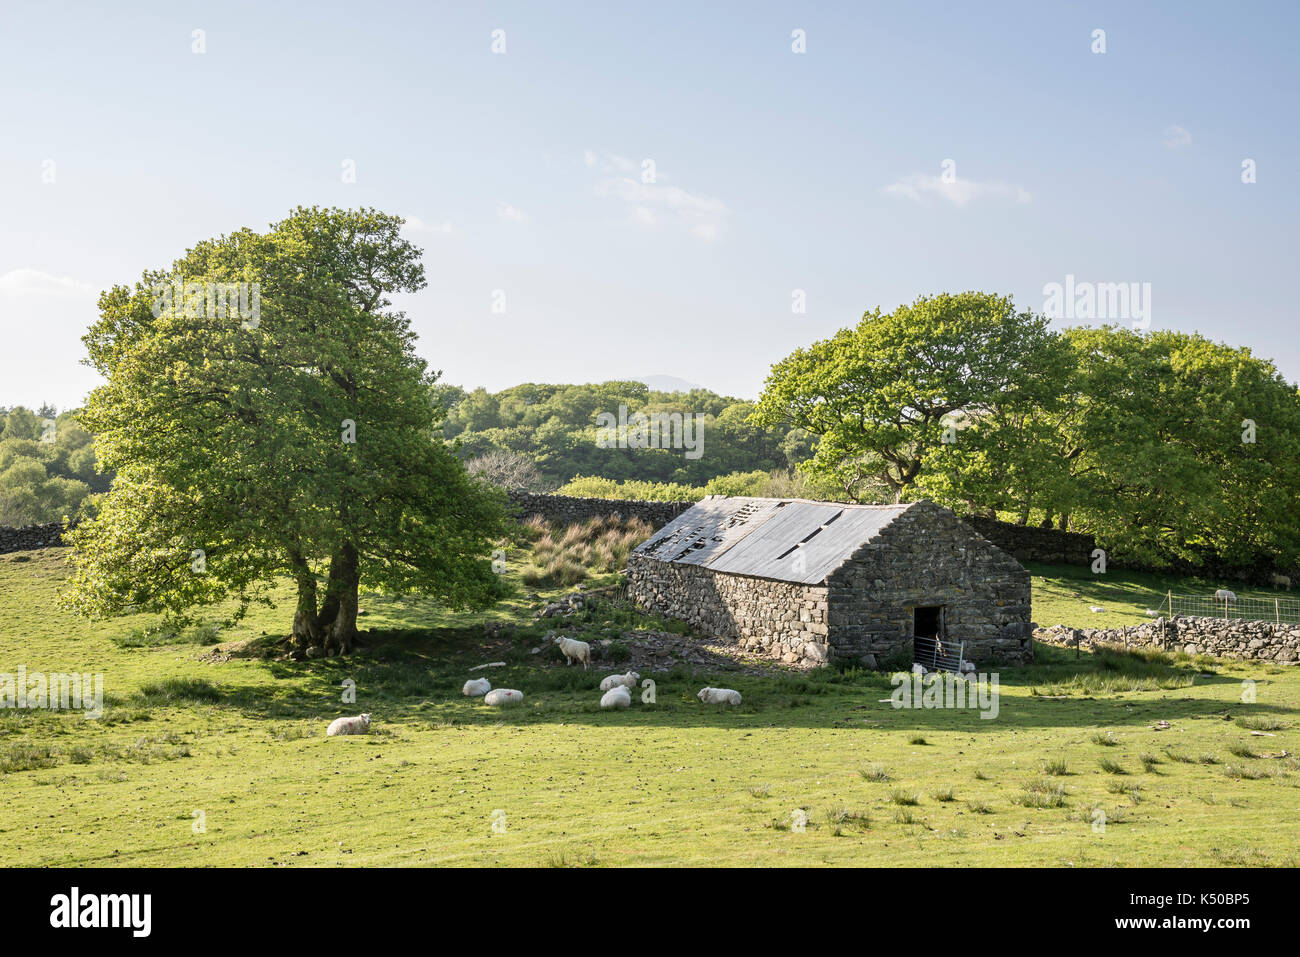 Old stone barn surrounded by sheep in the Welsh countryside near Harlech. Stock Photo